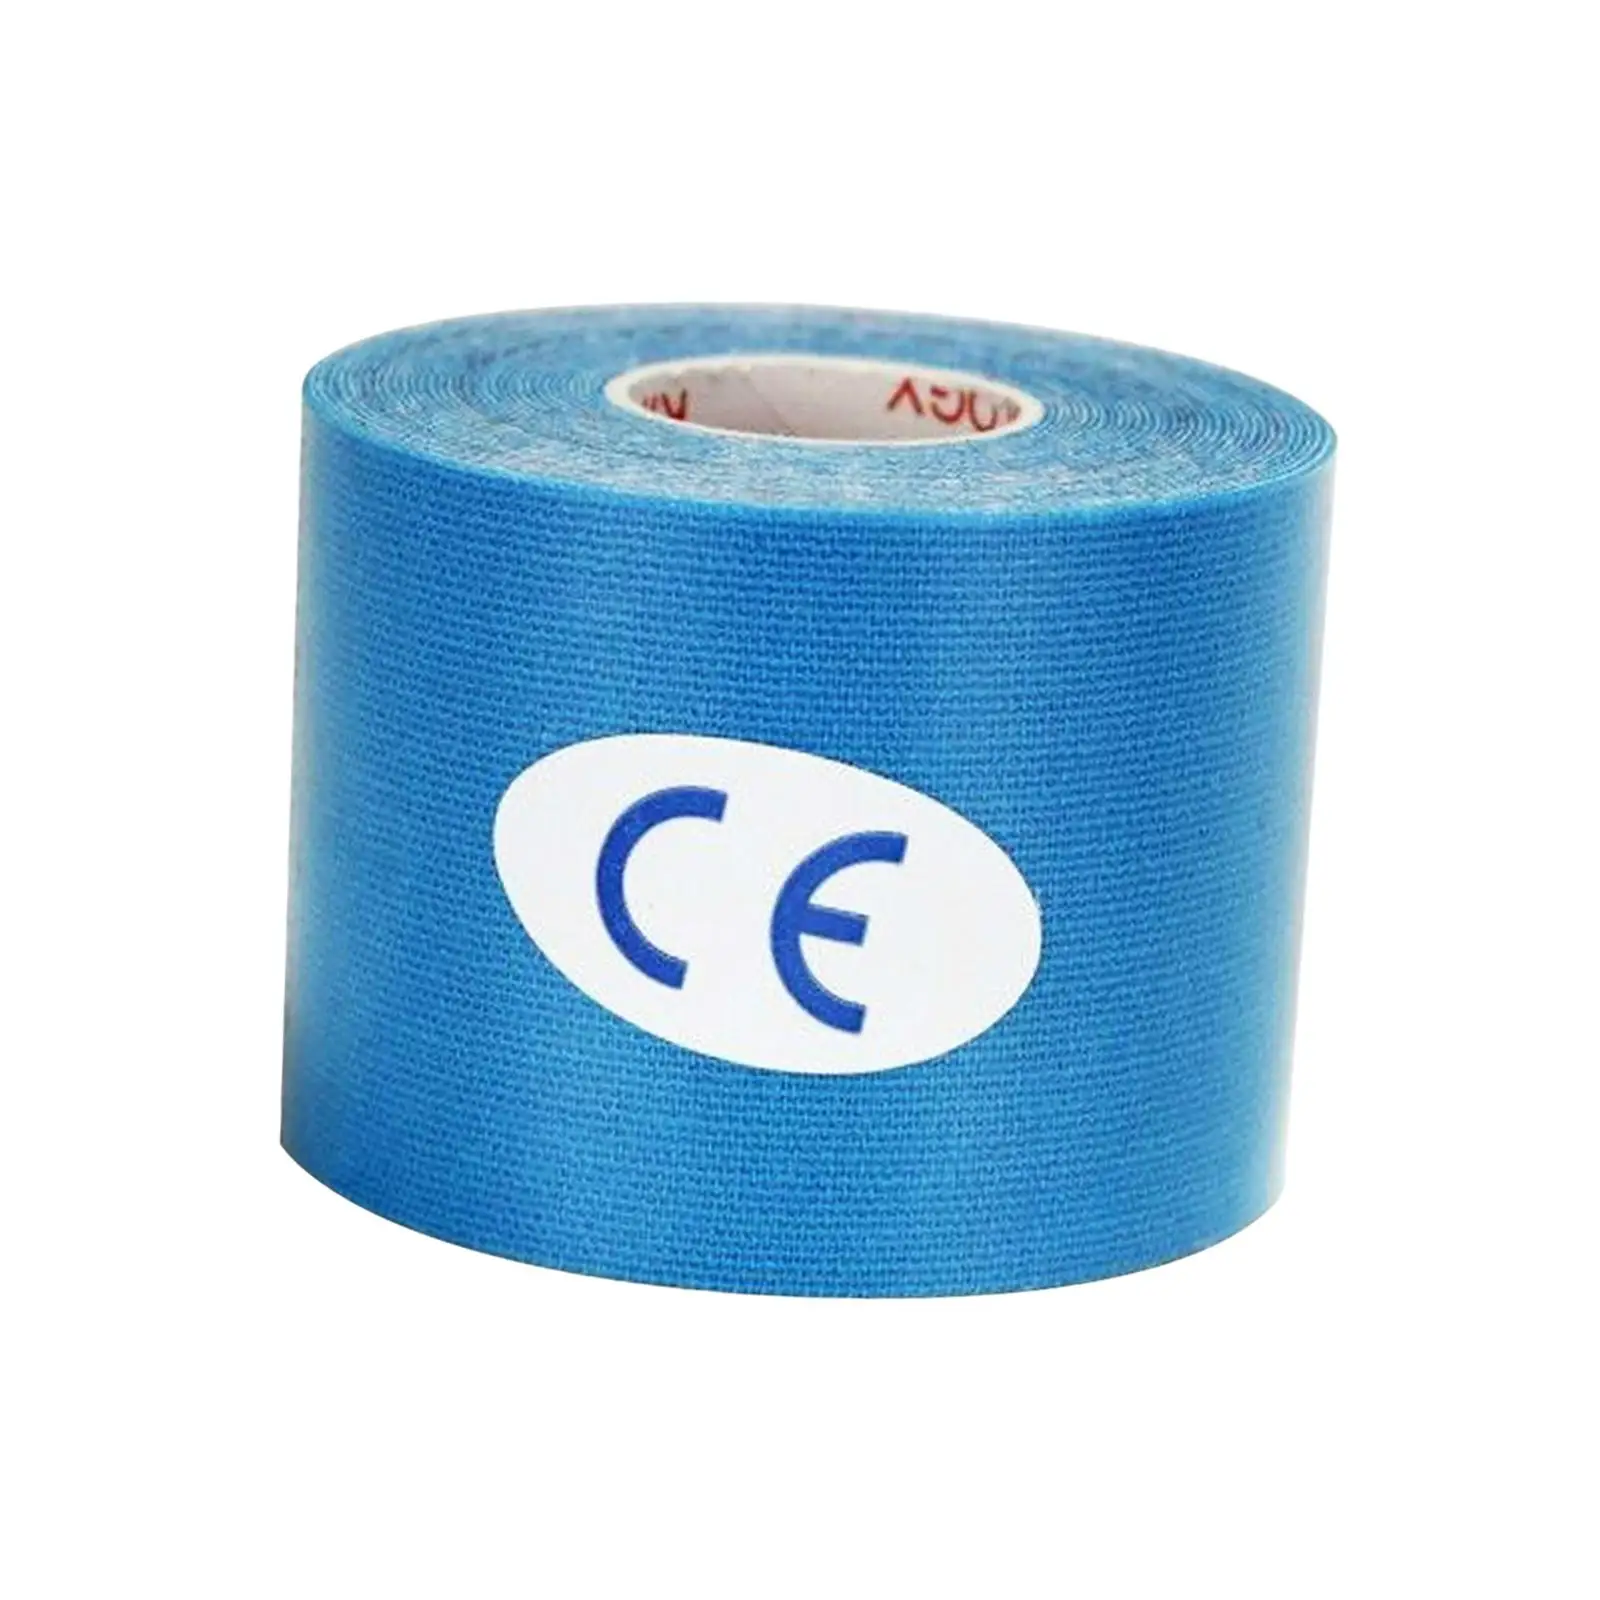 Athletic Tape Sports Wrap Tape Wrap Water Resistant 5M Self Sticky Protective Tape Wrist Ankle Tape for Ankles Chest Running